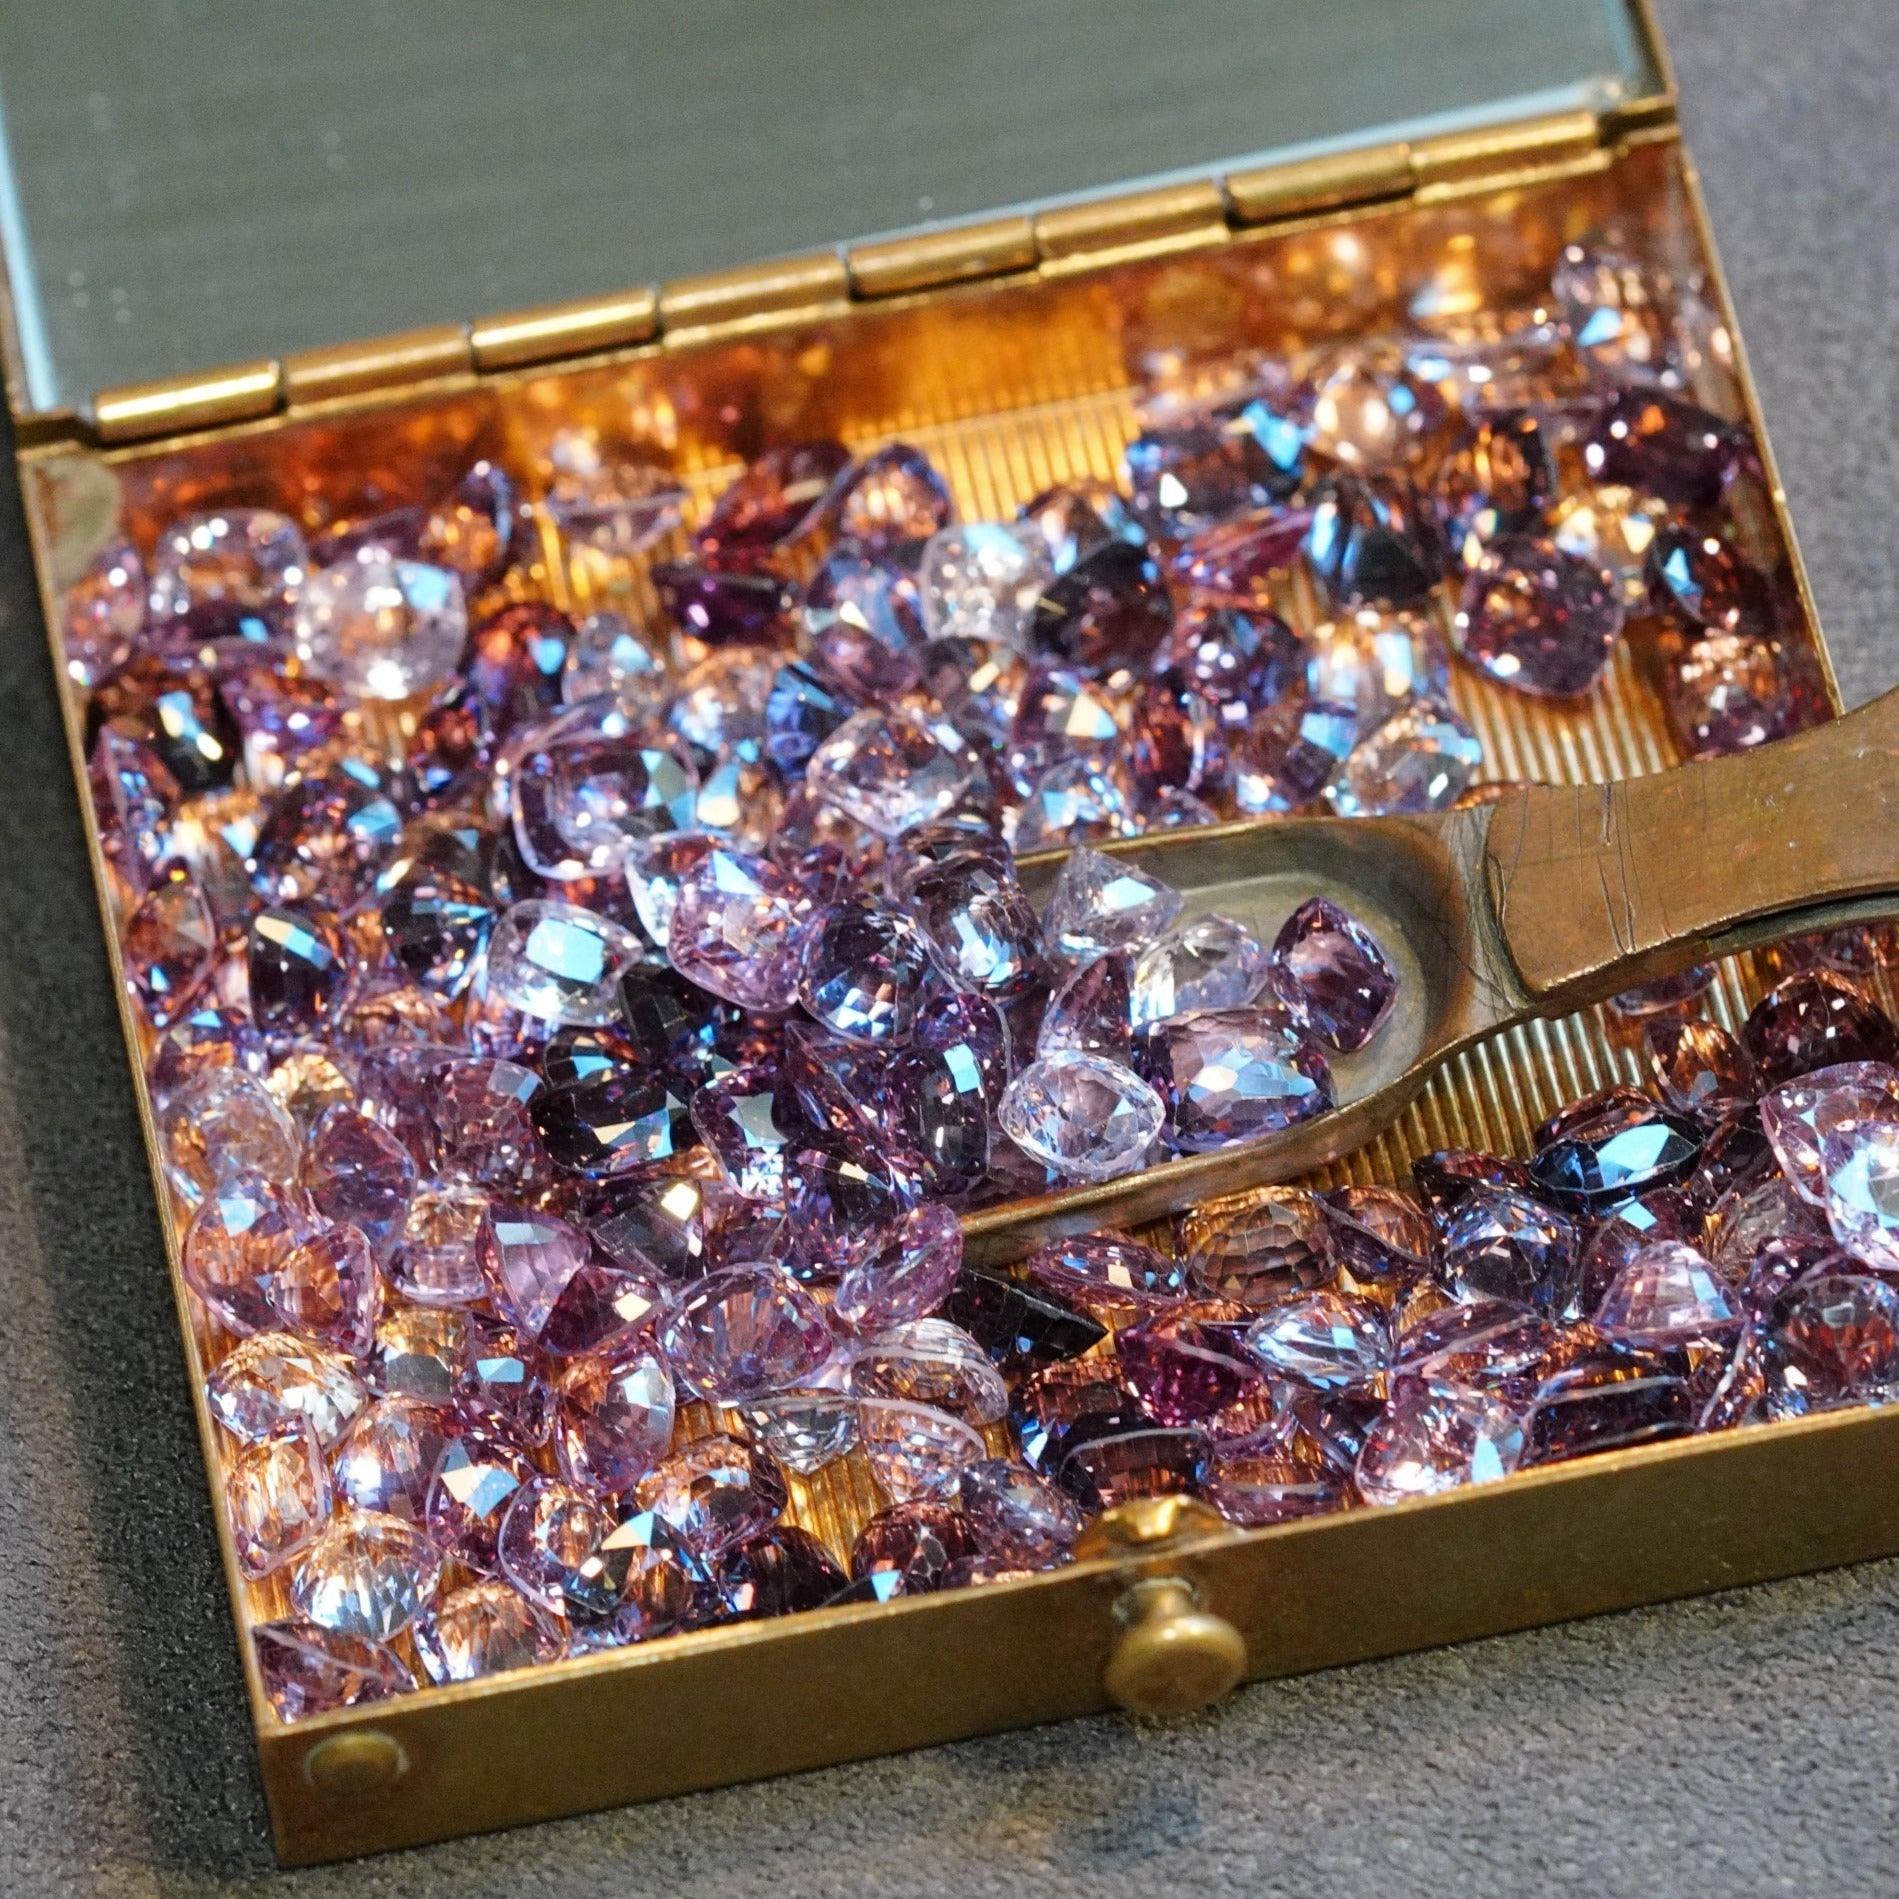 Why You Should Invest in Gems: Reasons to Diversify Your Portfolio with Precious Stones